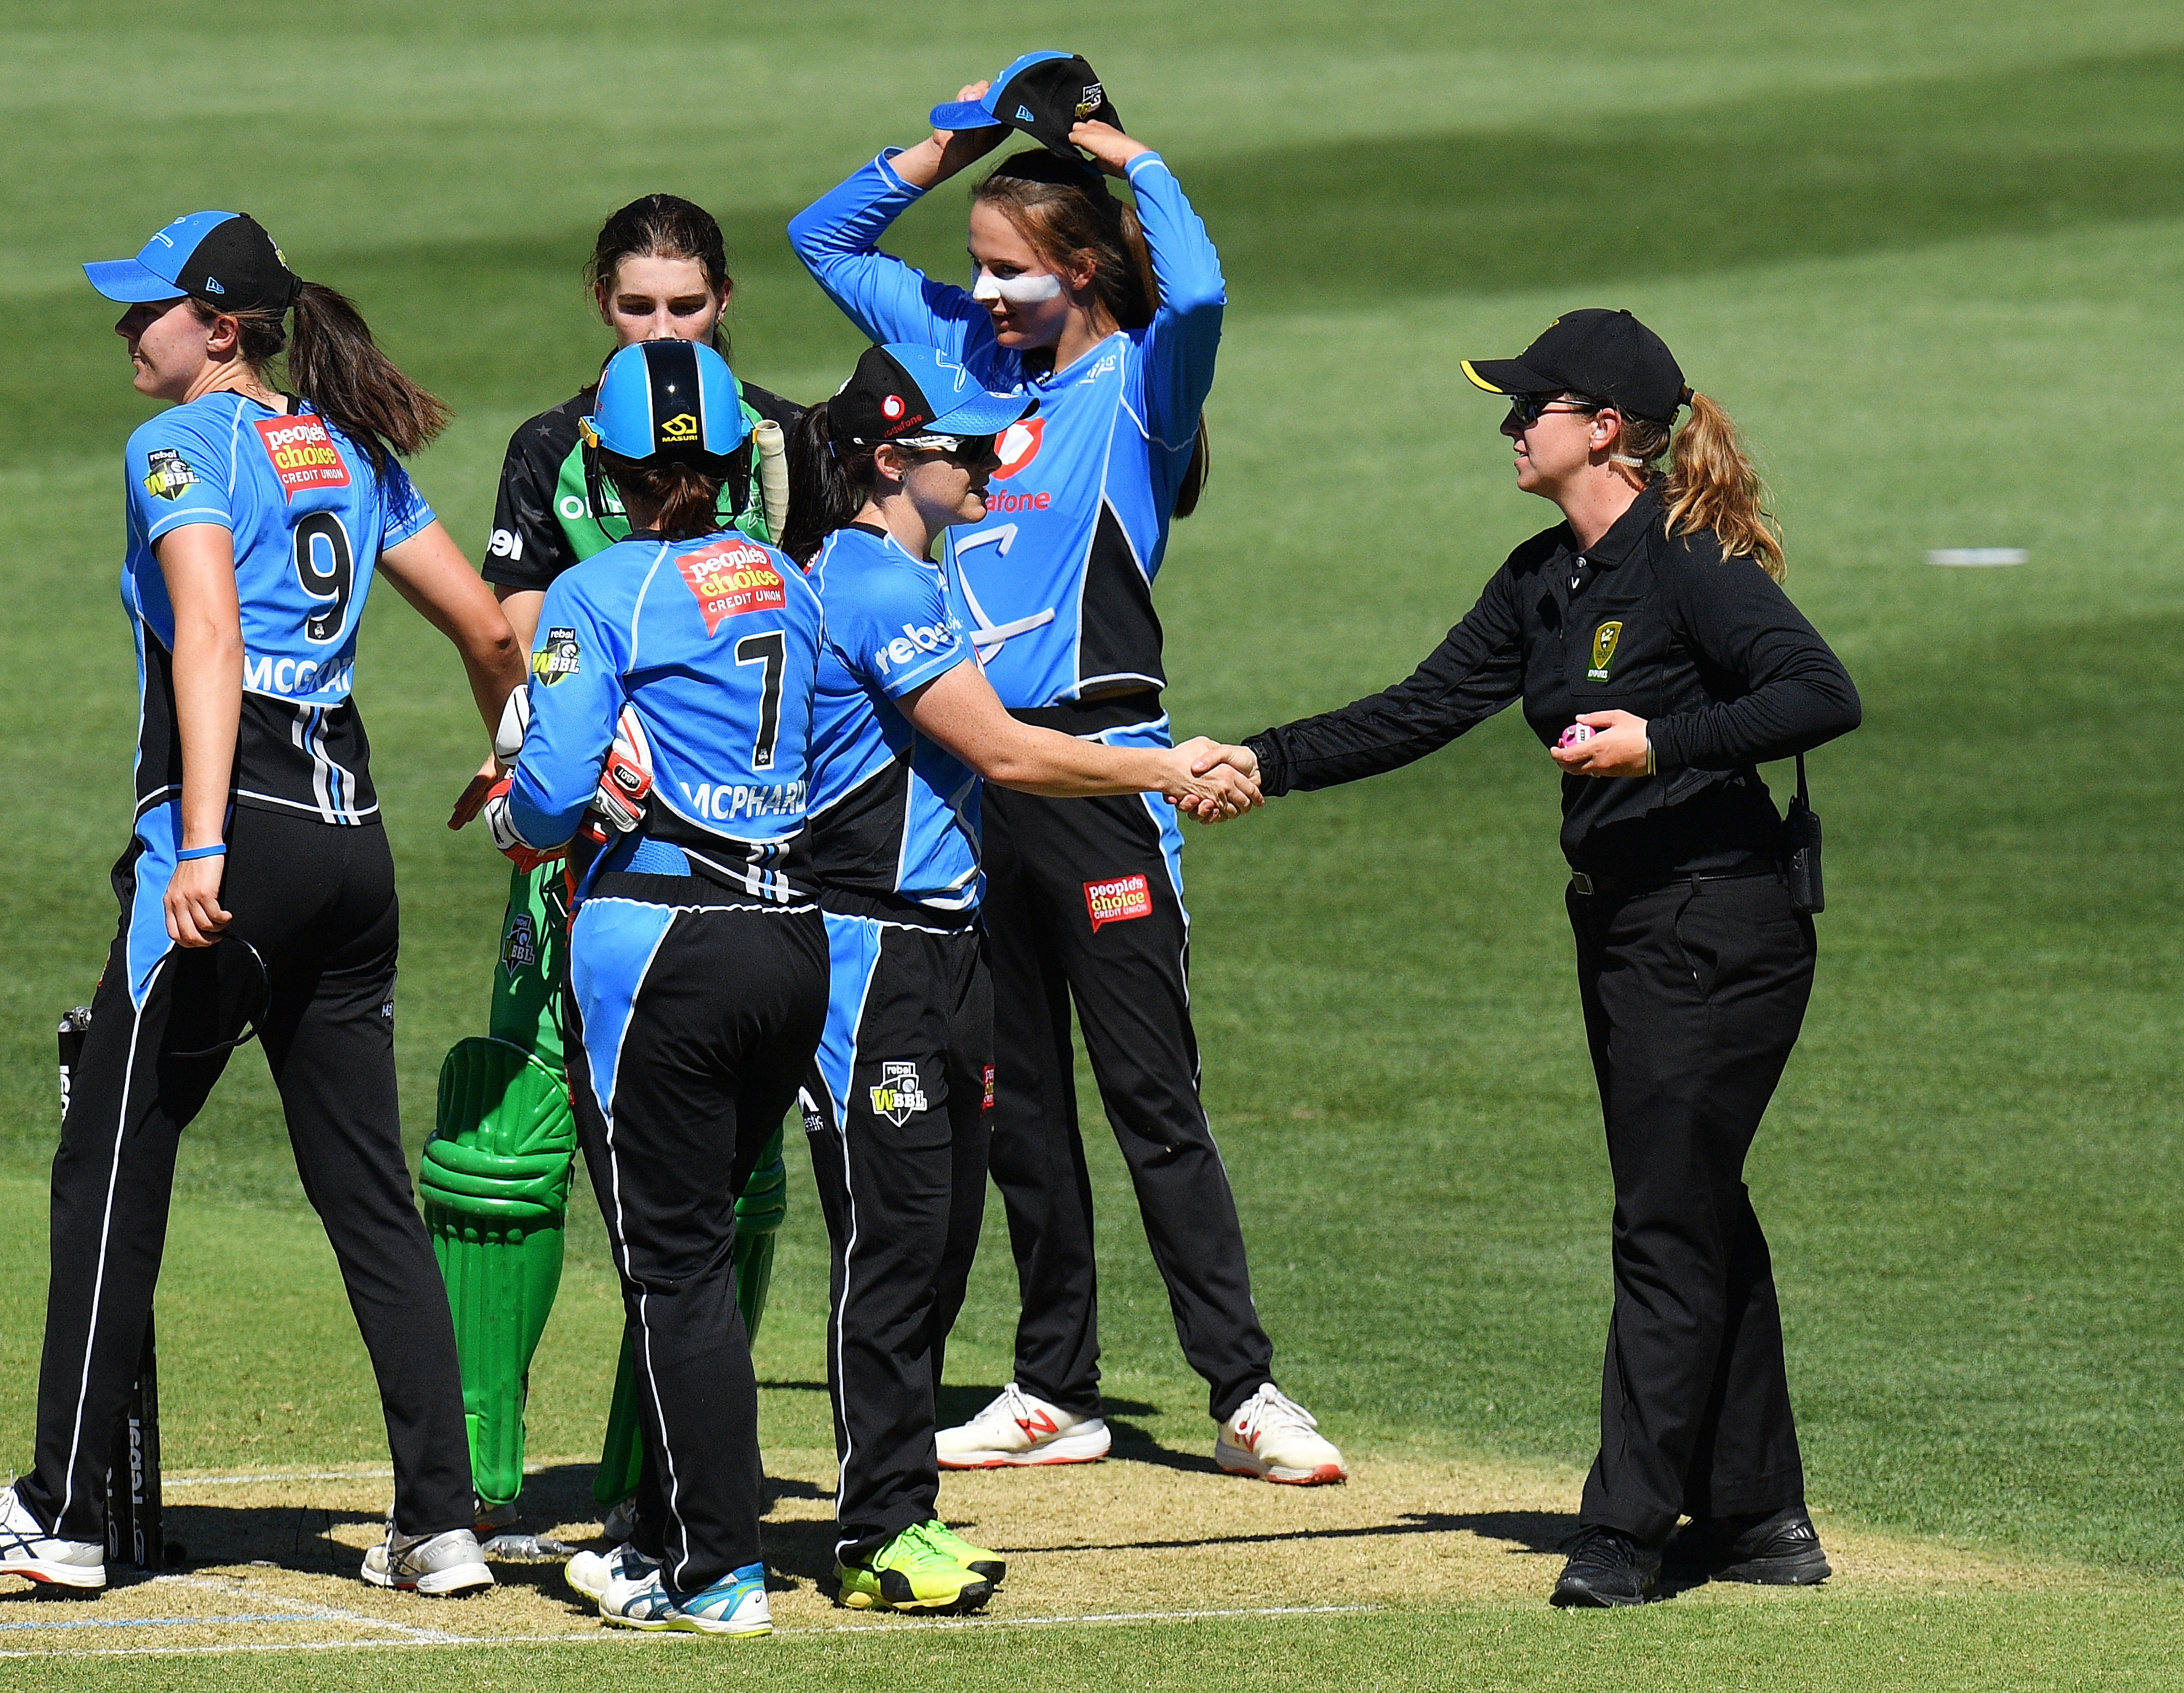 ADELAIDE, VICTORIA - DECEMBER 23: (L-R) Umpire Claire Polosak shakes hands during the Adelaide Strikers v Melbourne Stars Women's Big Bash League Match at Adelaide Oval on December 23, 2018 in Adelaide, Australia. (Photo by Daniel Kalisz/Getty Images)